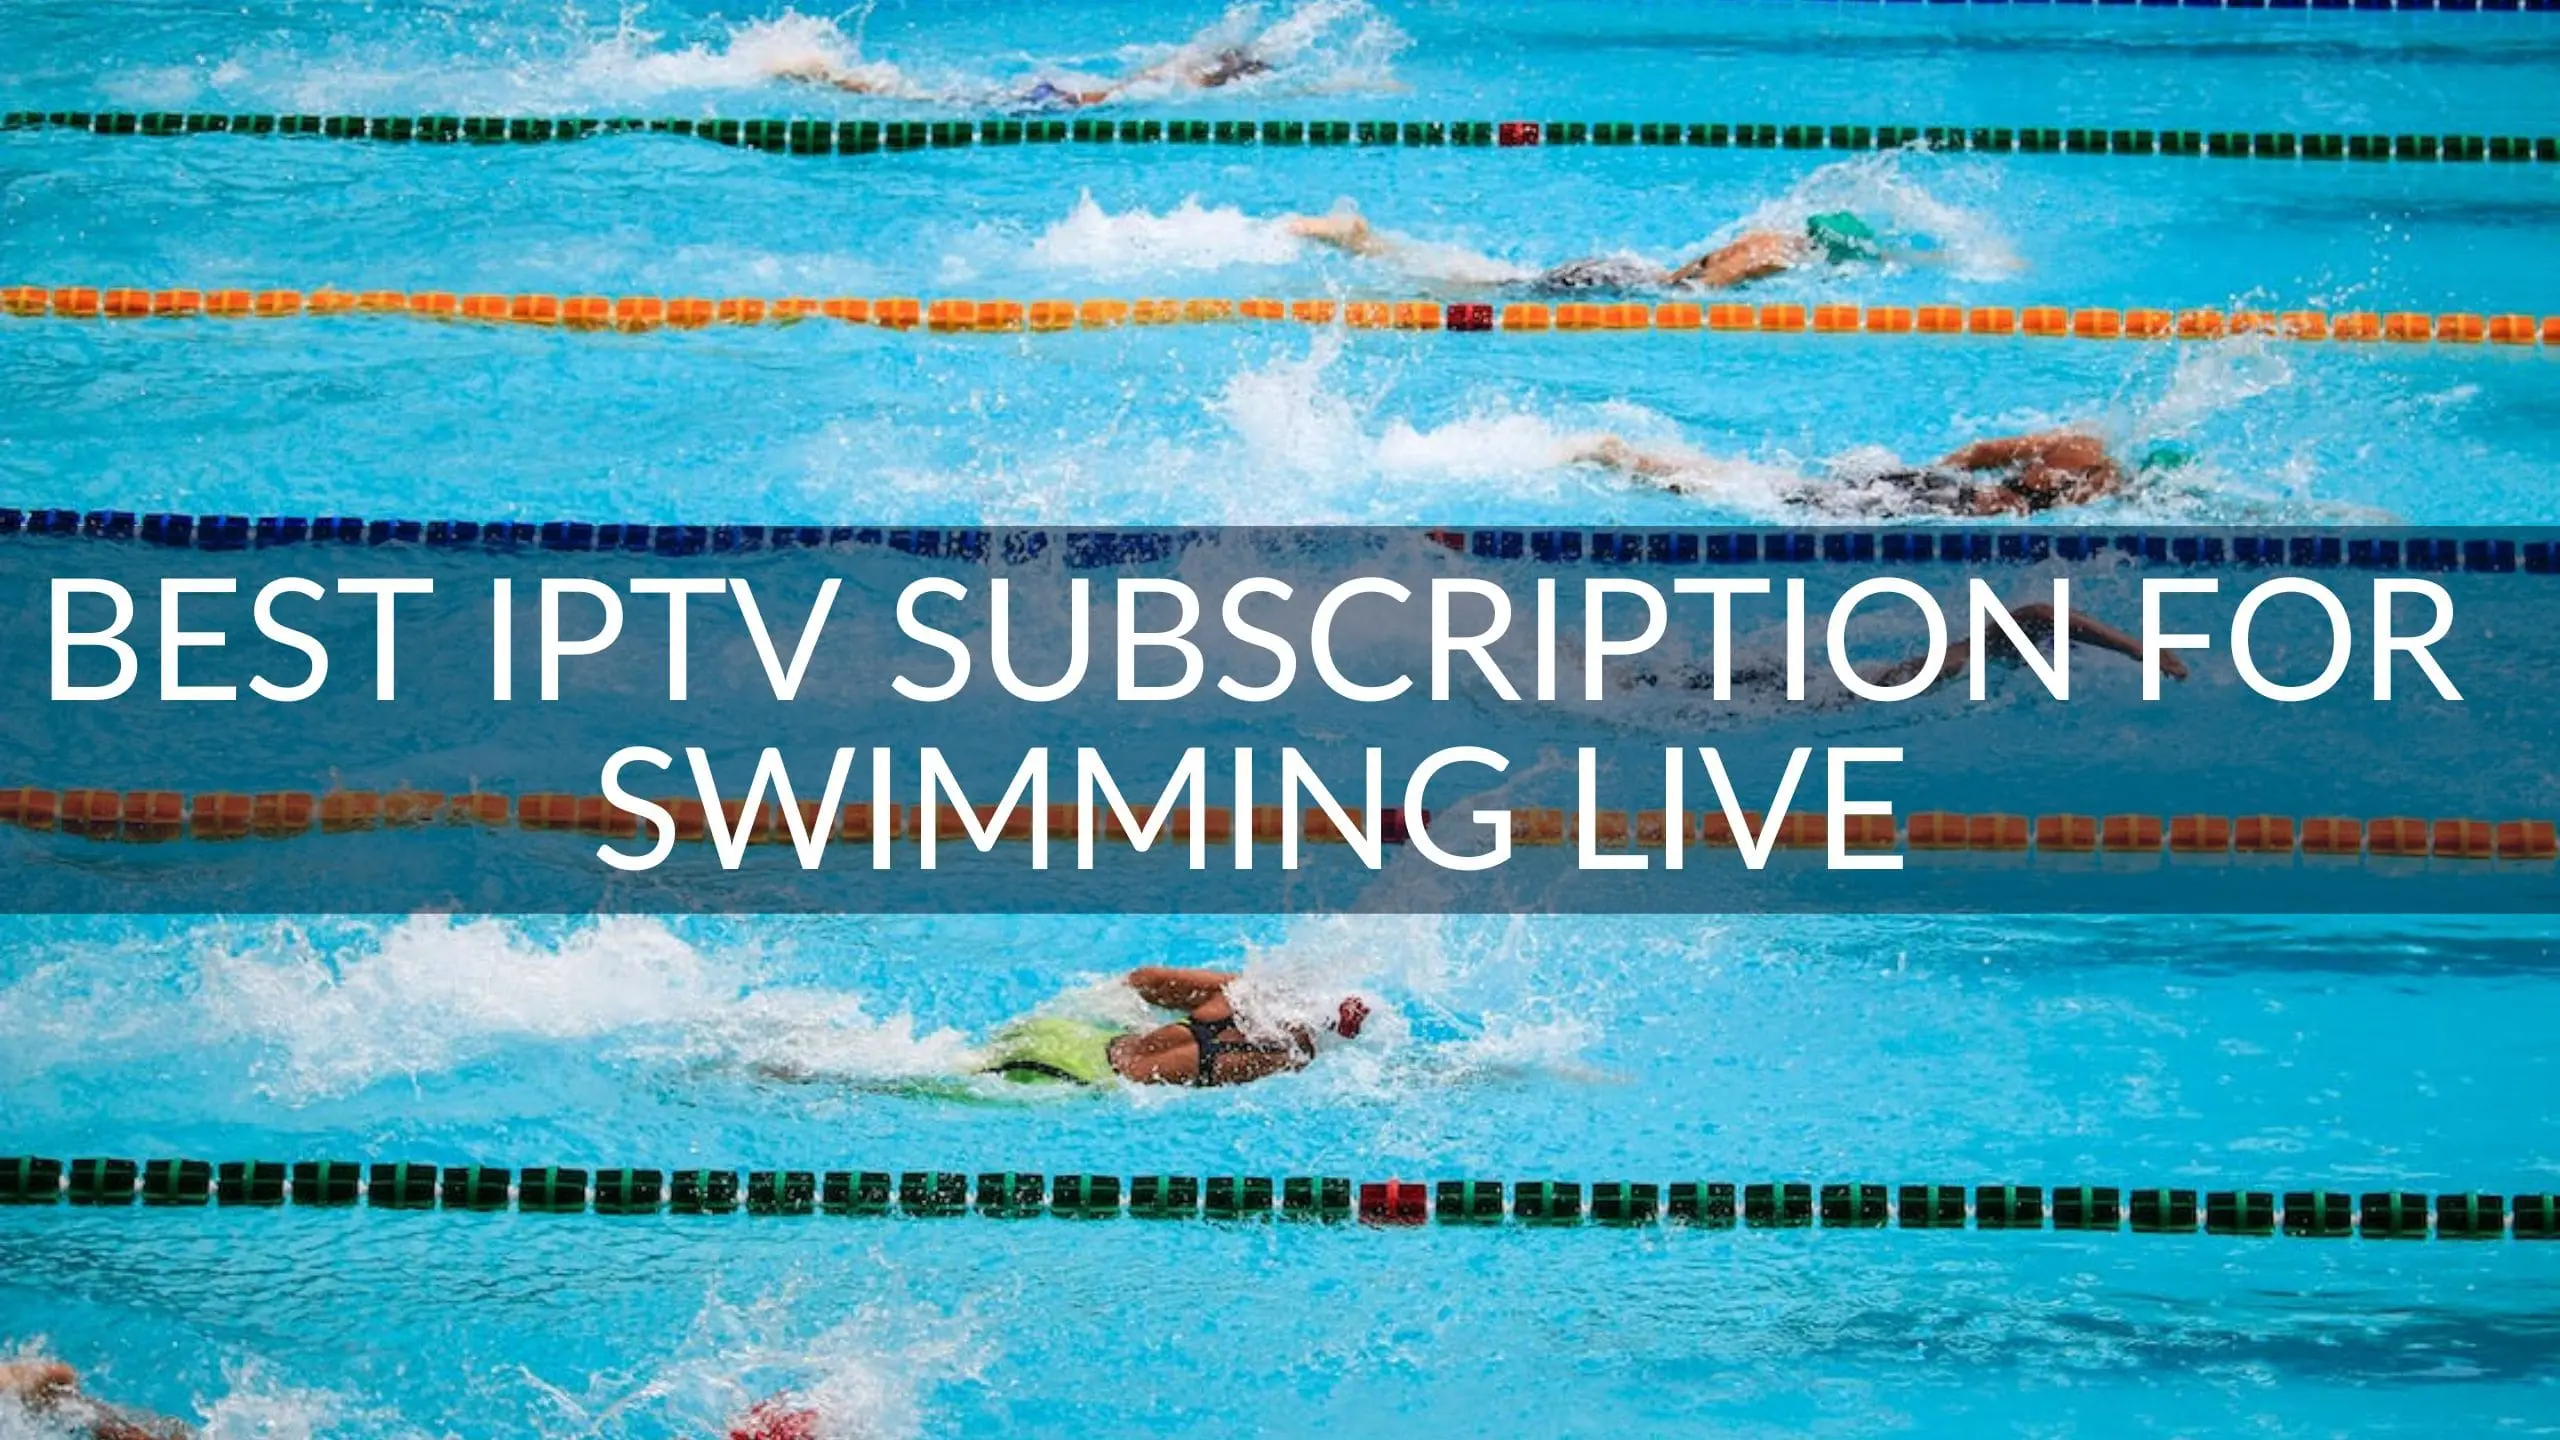 Best IPTV Subscription for Swimming Live